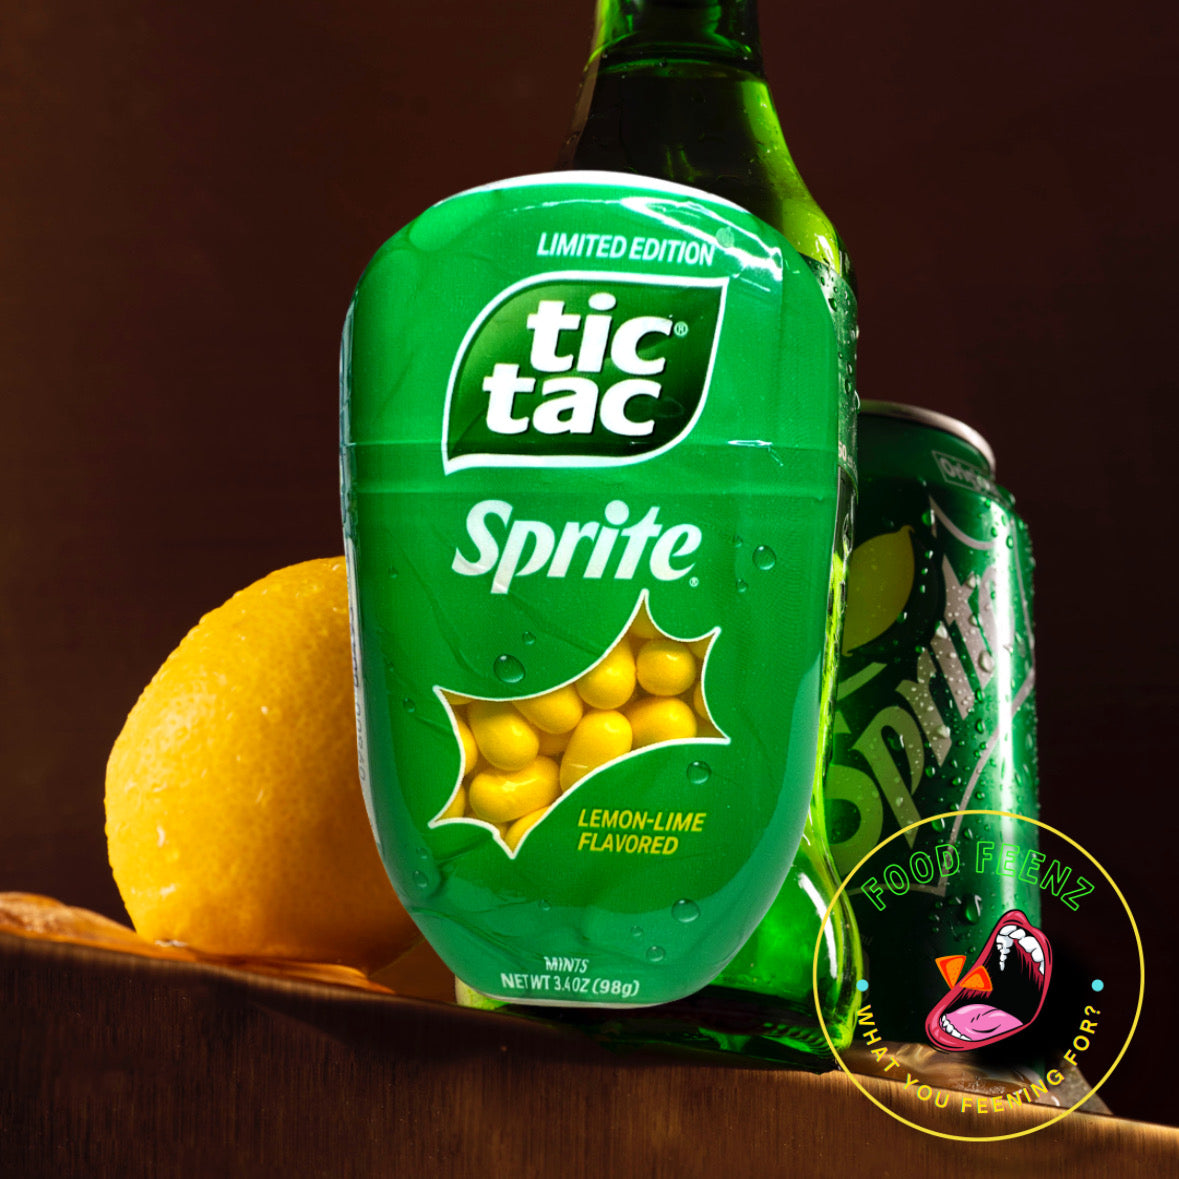 Tic Tac Sprite (Limited Edition)